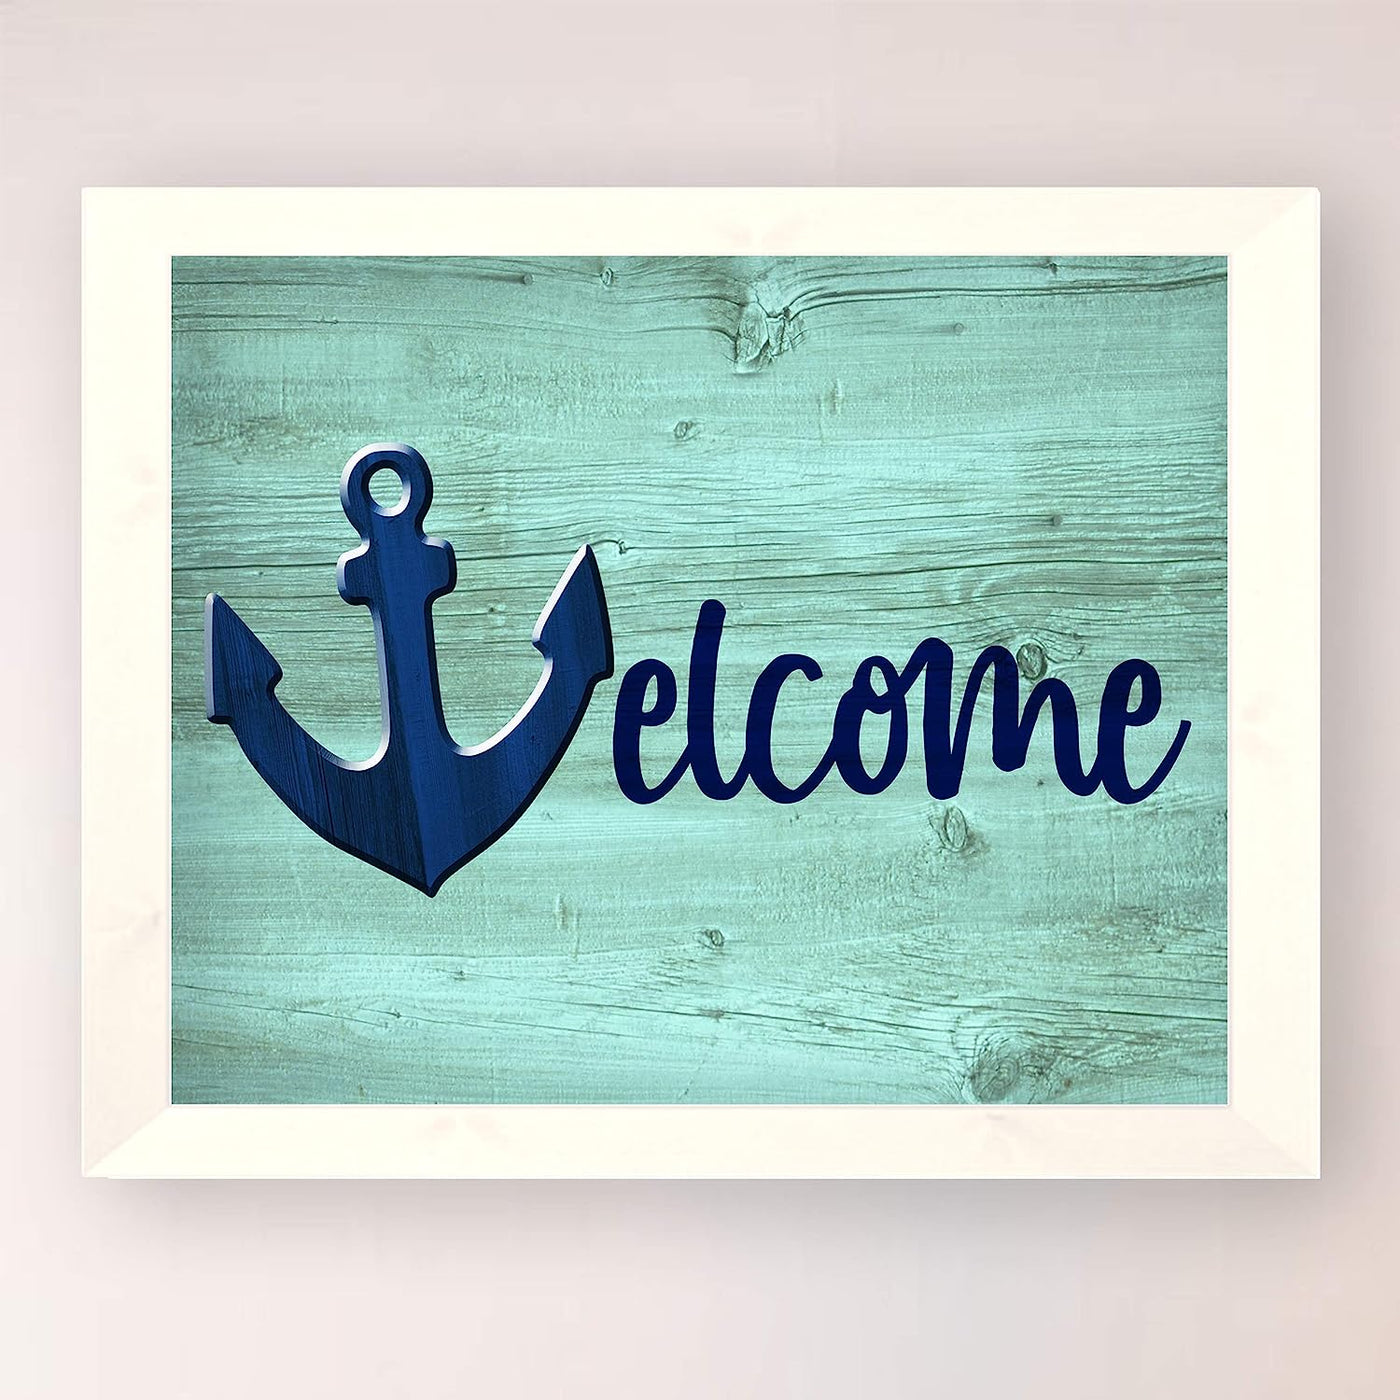 Welcome Rustic Beach Wall Sign -10 x 8" Ocean Themed Anchor Print w/Replica Wood Design-Ready to Frame. Fun Vacation Decor for Home-Cabin-Beach House. Great Nautical Gift! Printed on Photo Paper.